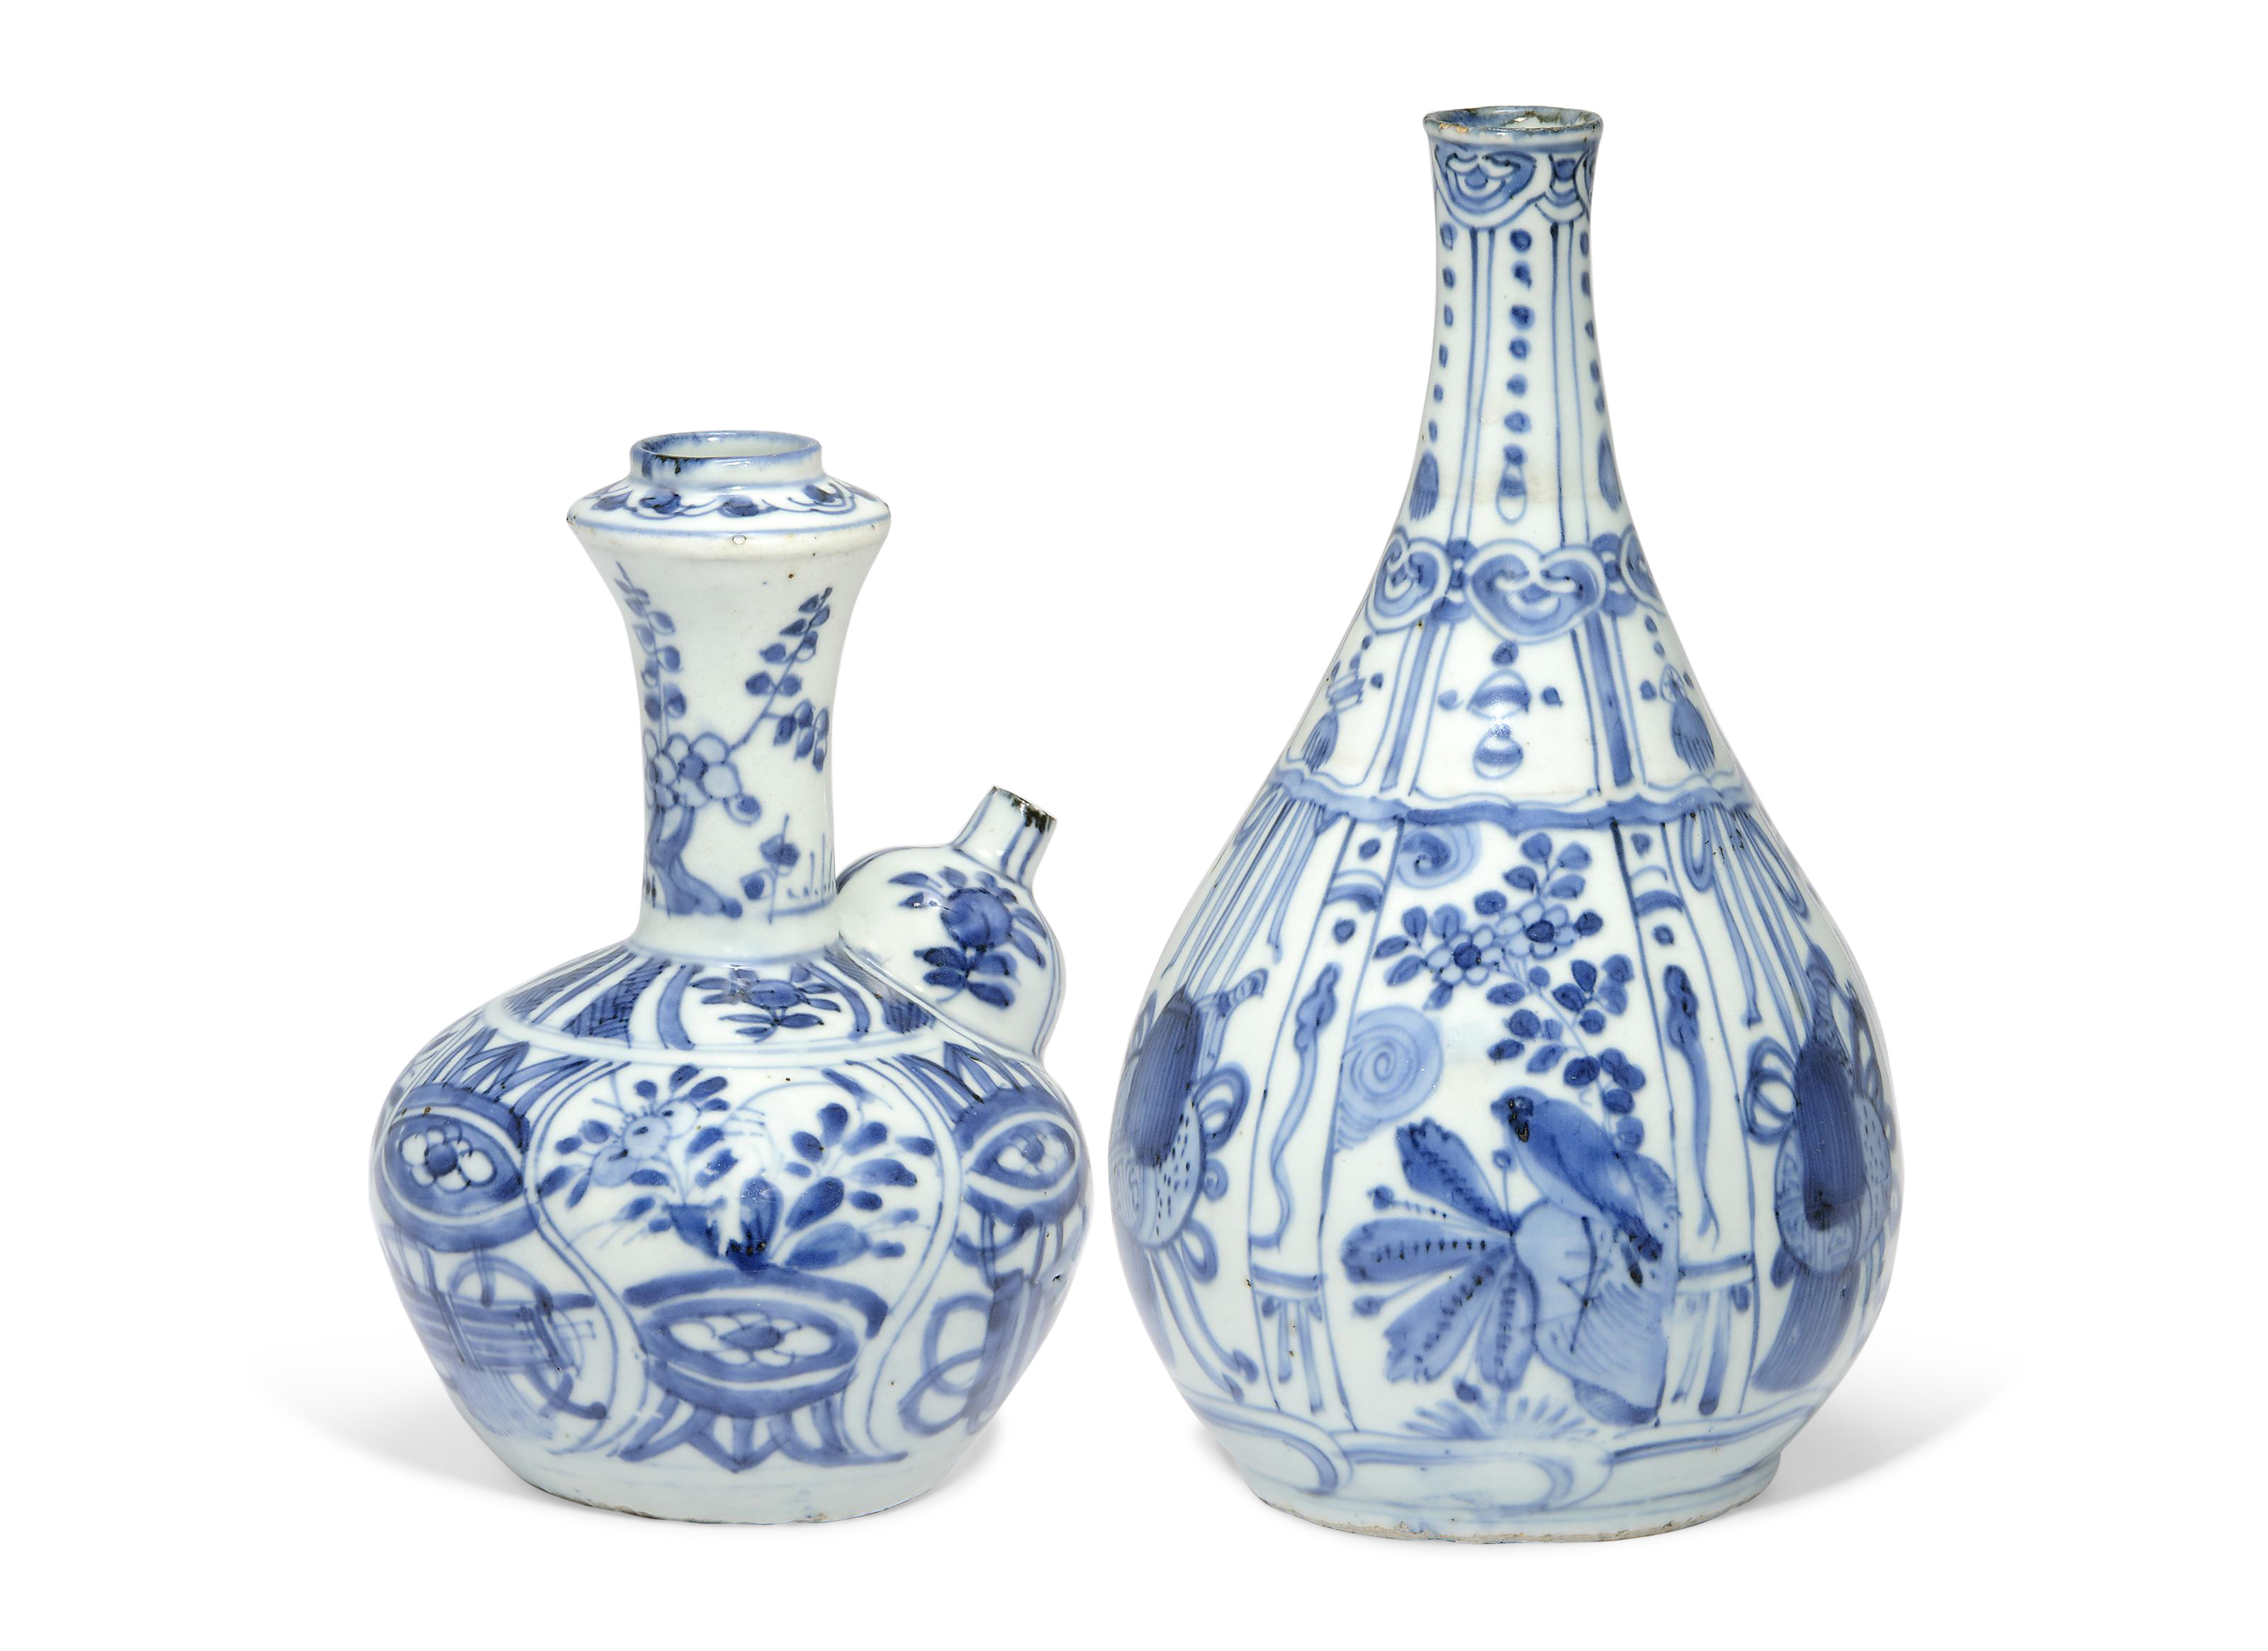 26 Trendy Blue and White Ceramic Vase 2024 free download blue and white ceramic vase of a blue and white kendi and a bottle vase wanli period 1573 1619 pertaining to a blue and white kendi and a bottle vase wanli period 1573 1619 christies